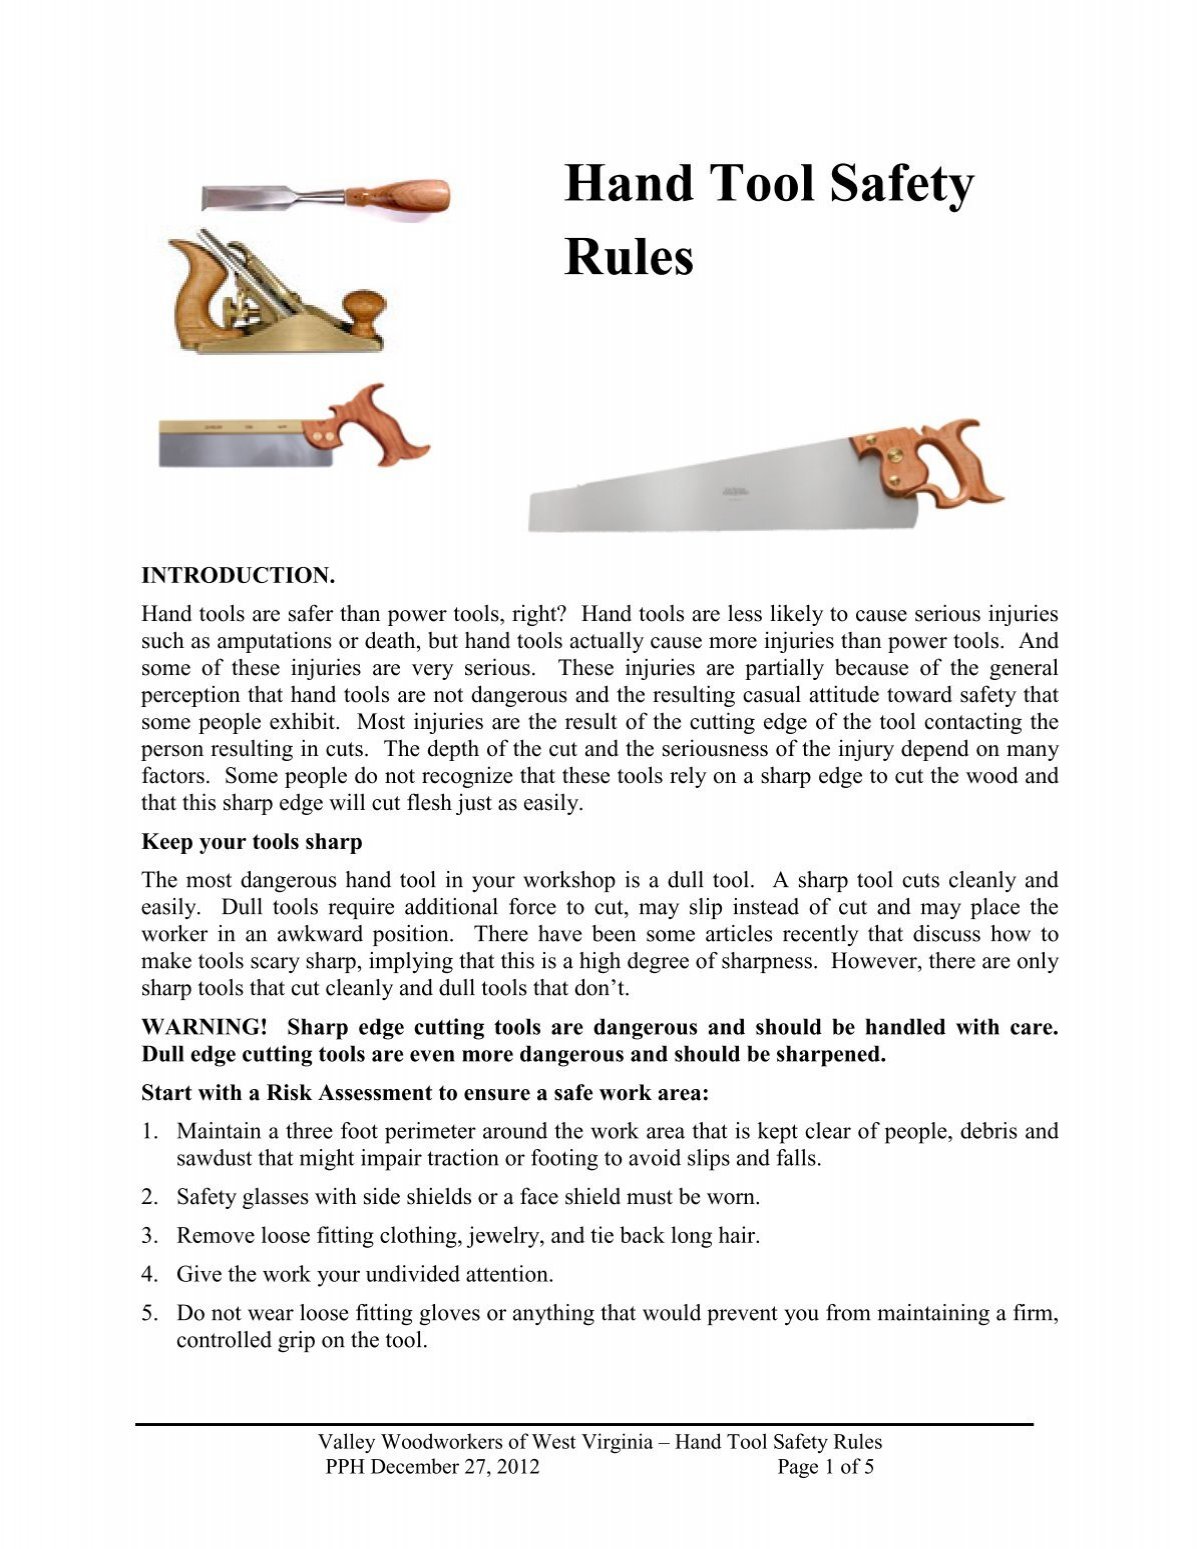 Hand Tool Safety Rules - Valley Woodworkers